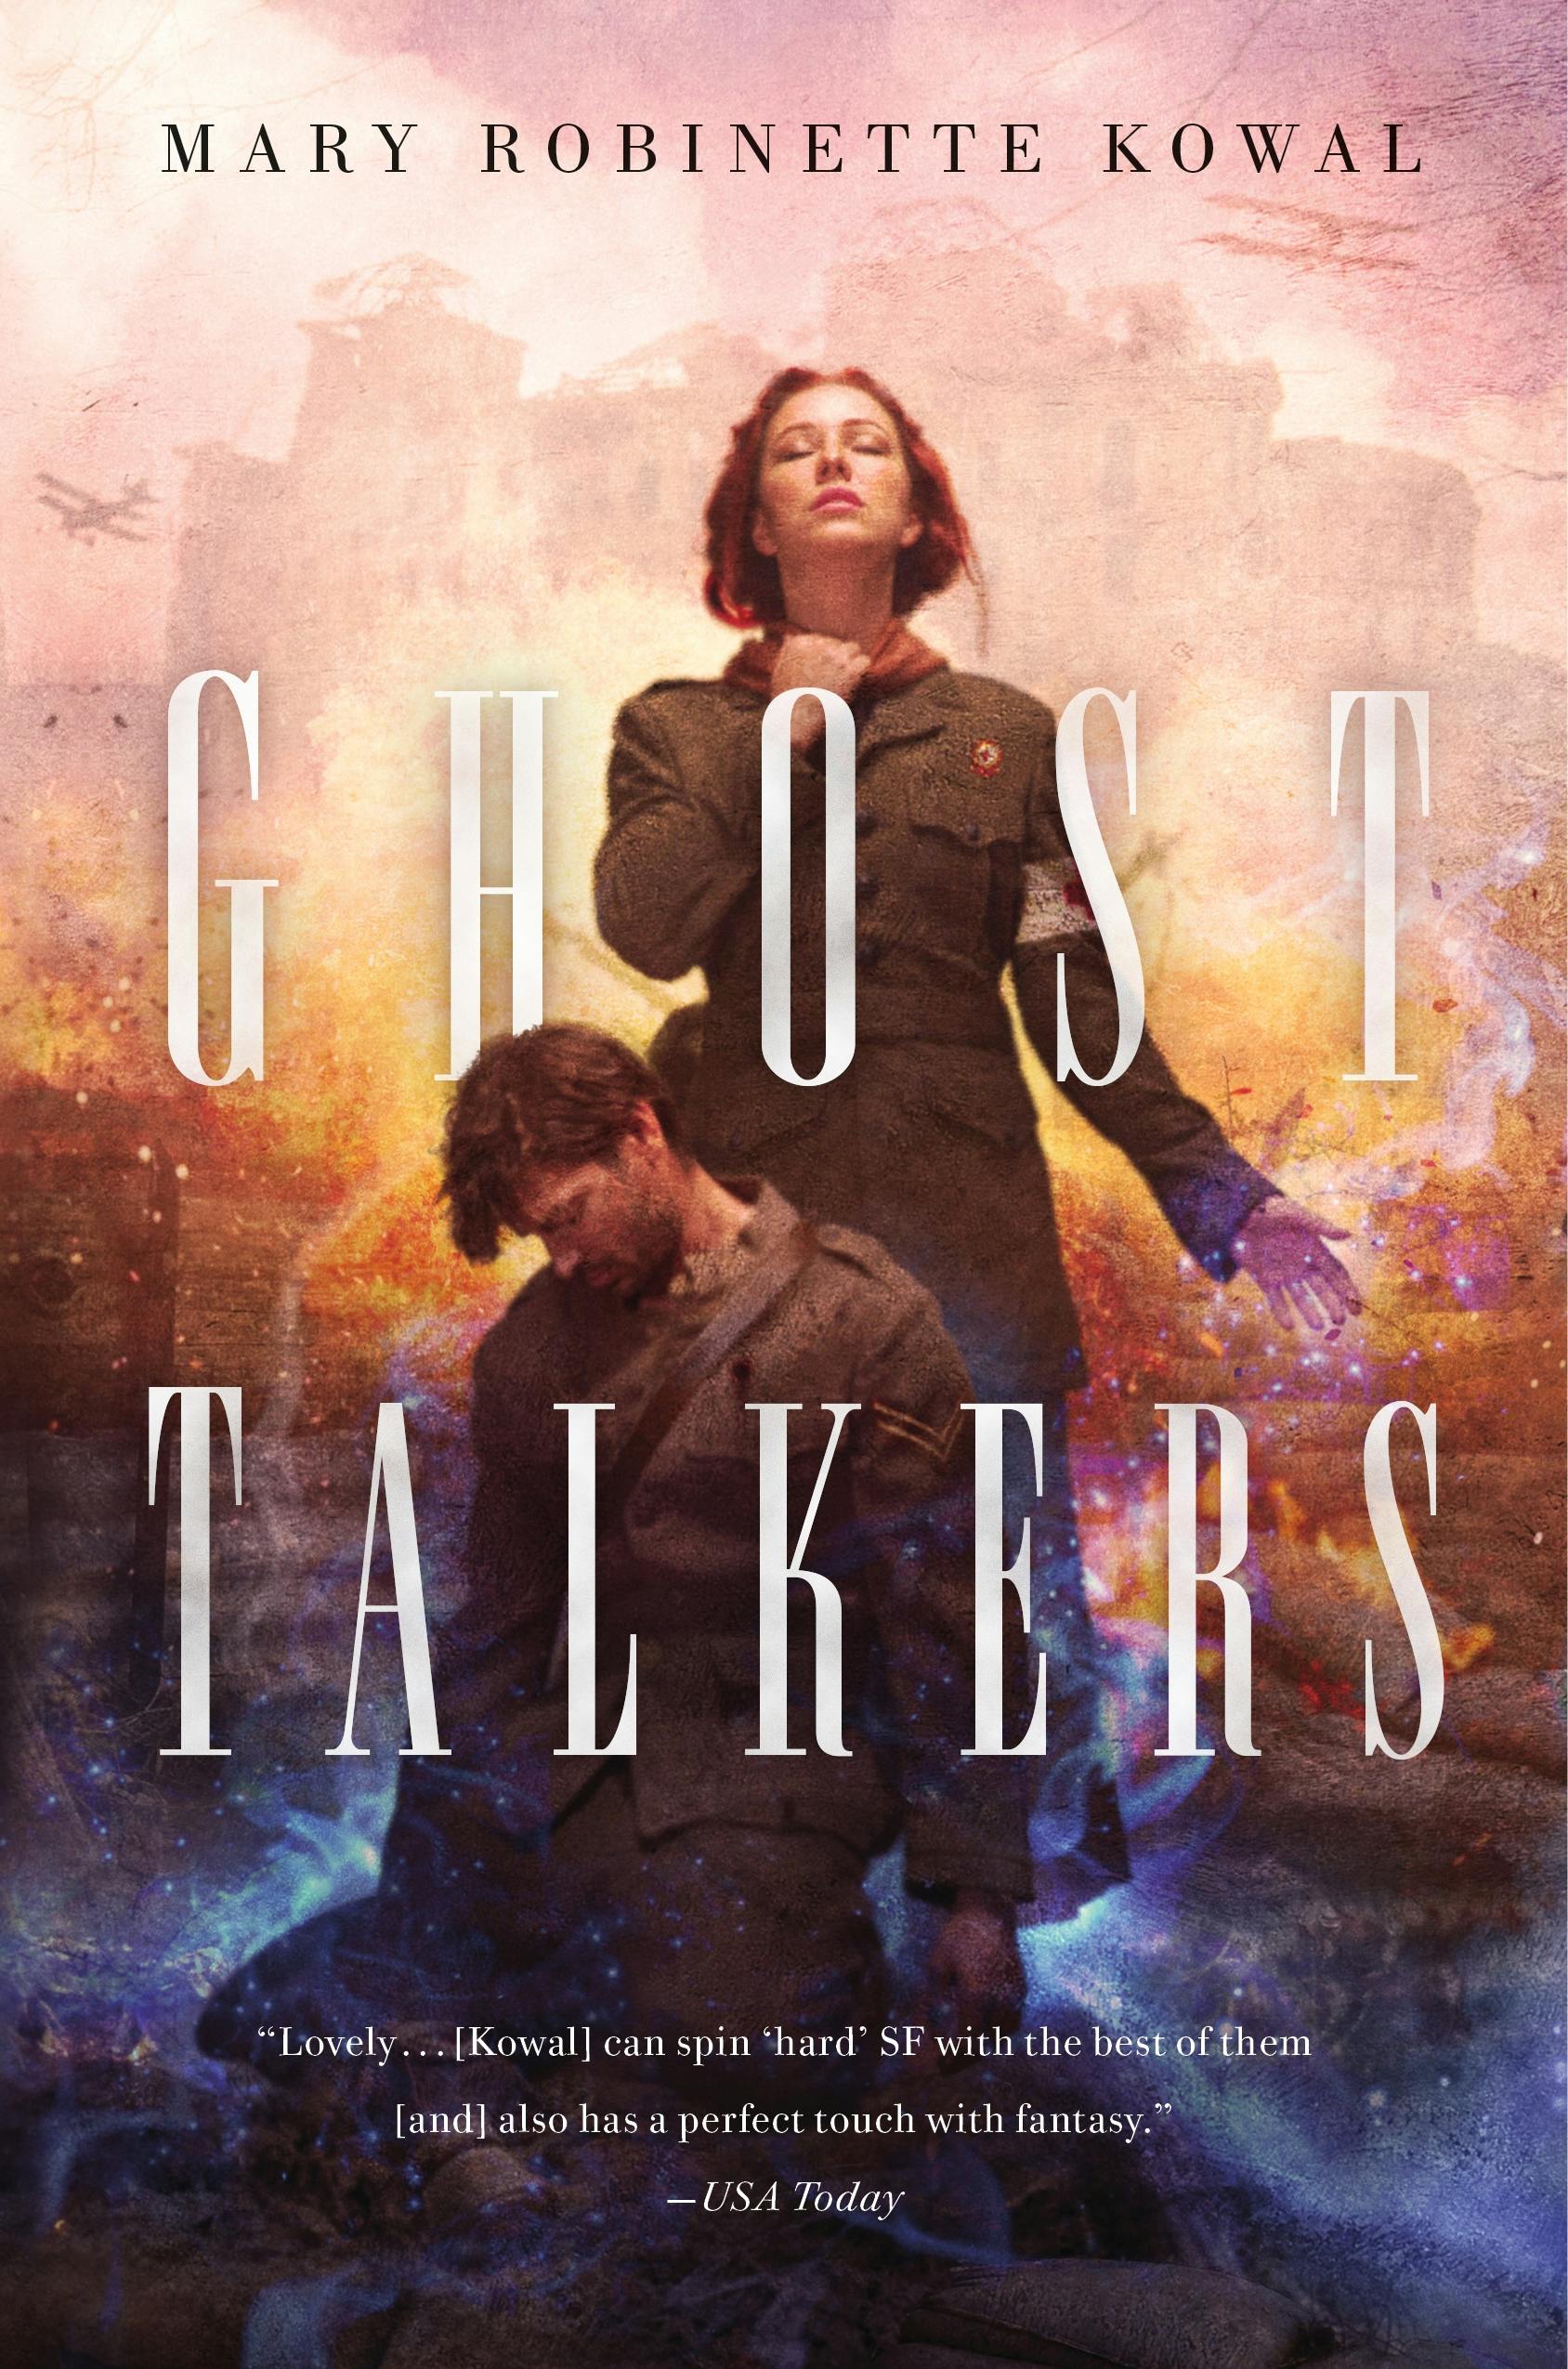 Cover for the book titled as: Ghost Talkers